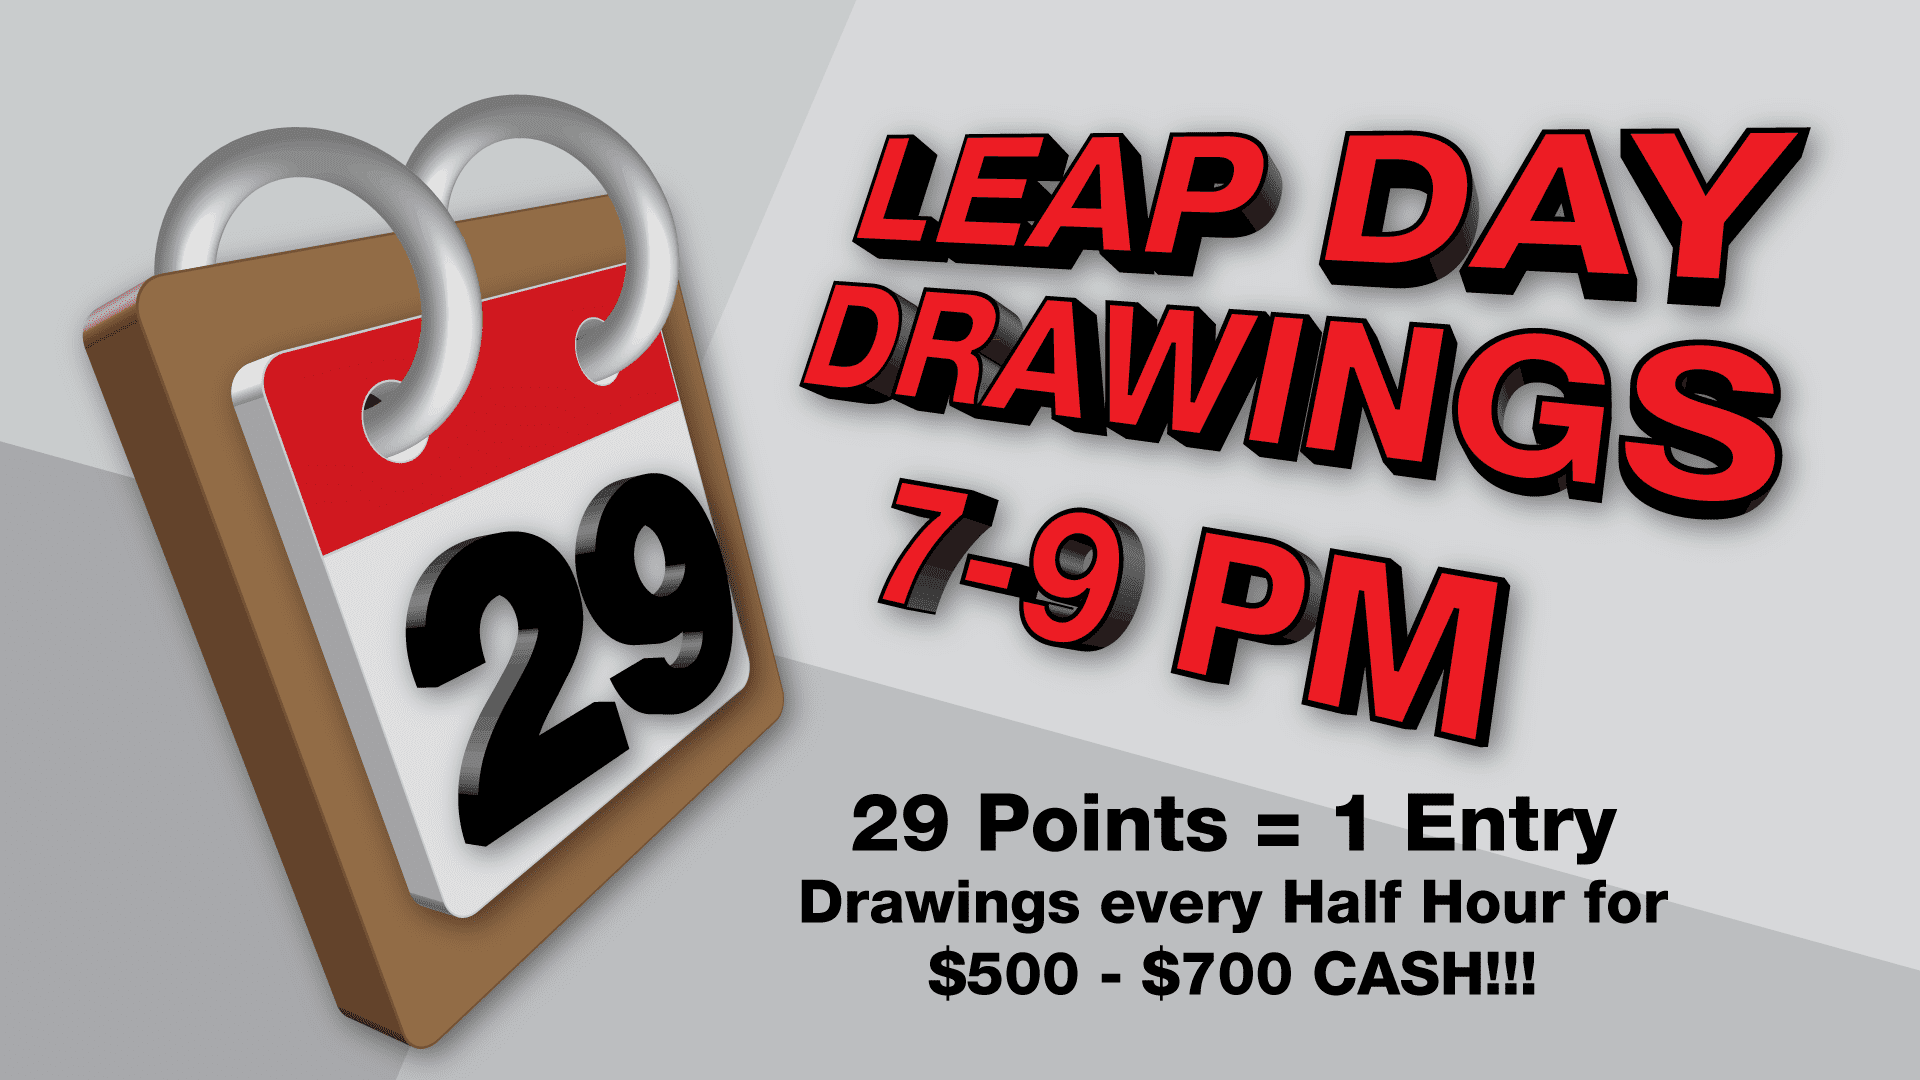 Promotional advertisement for leap day drawings offering cash prizes between 7-9 pm, with entries based on a points system.